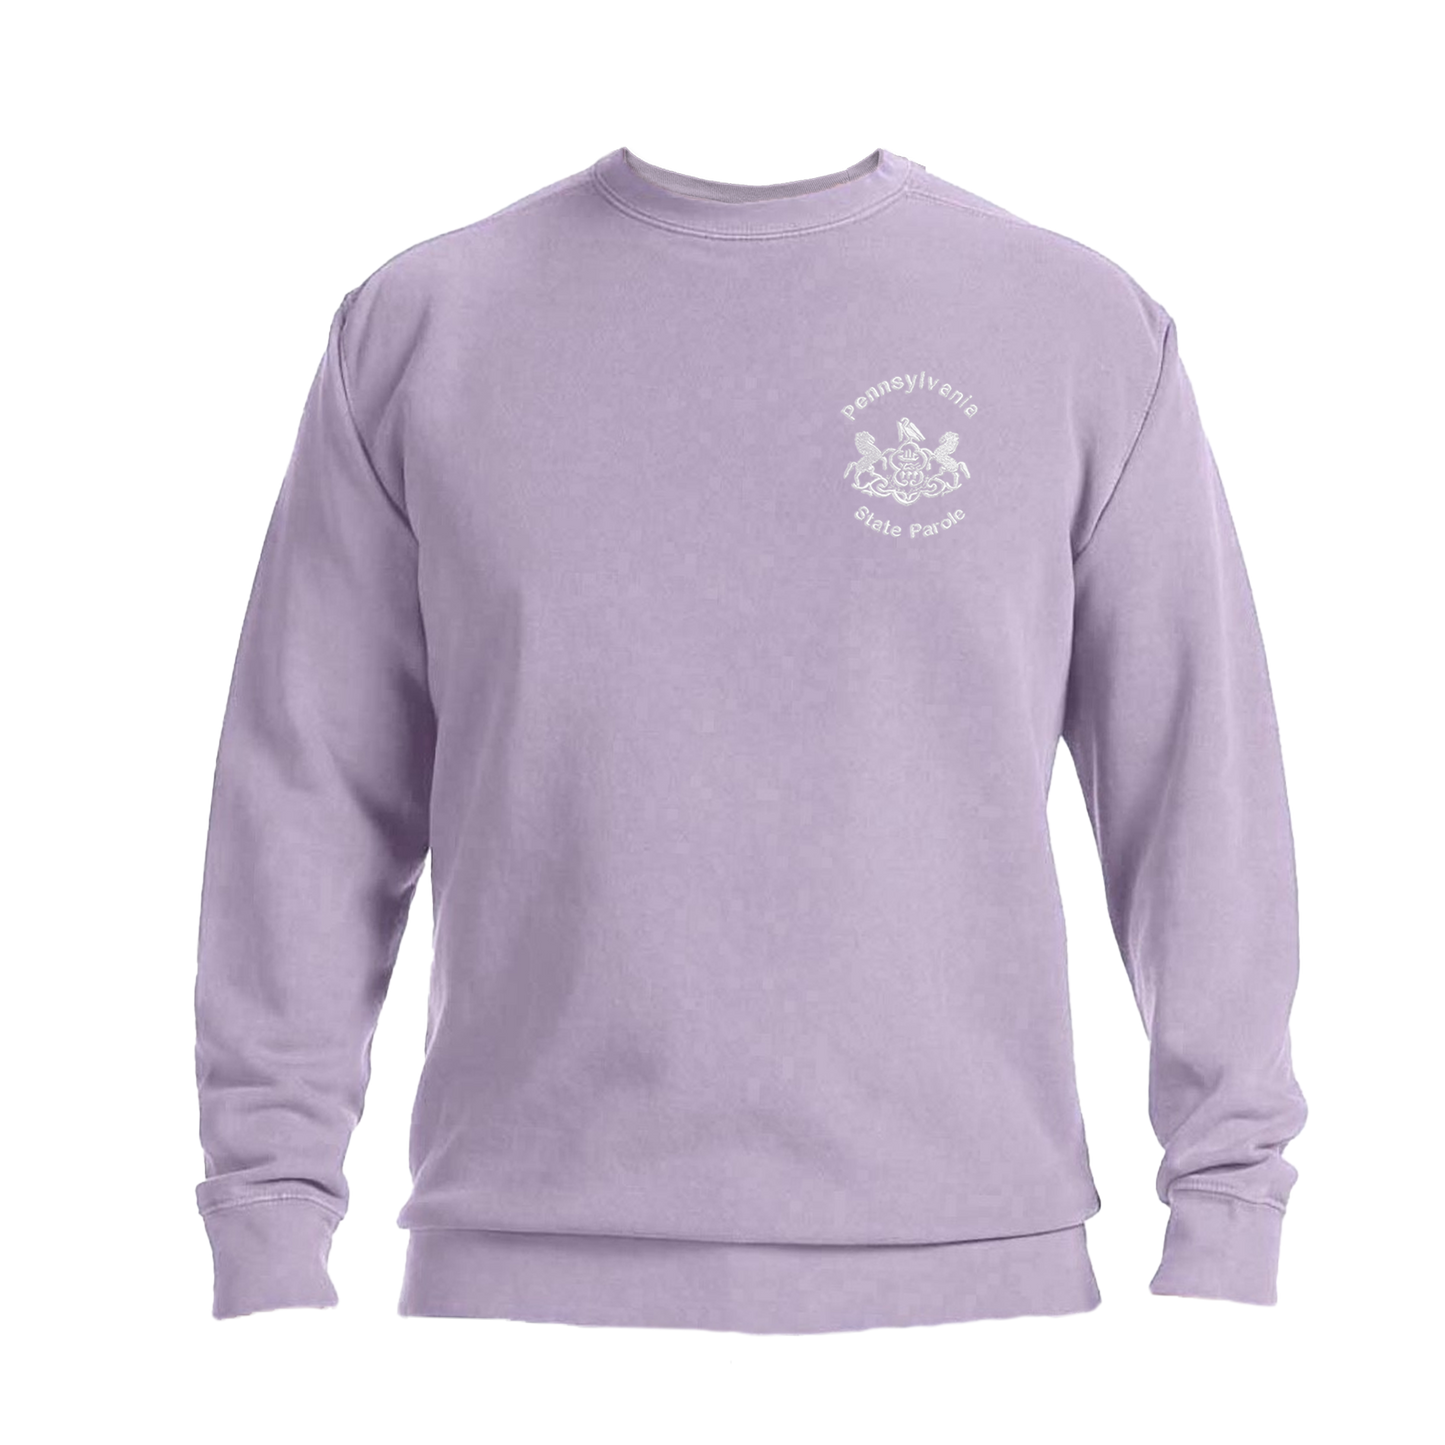 Adult Comfort Colors Crewneck Sweatshirt with Embroidered State Parole Seal (Various Colors)